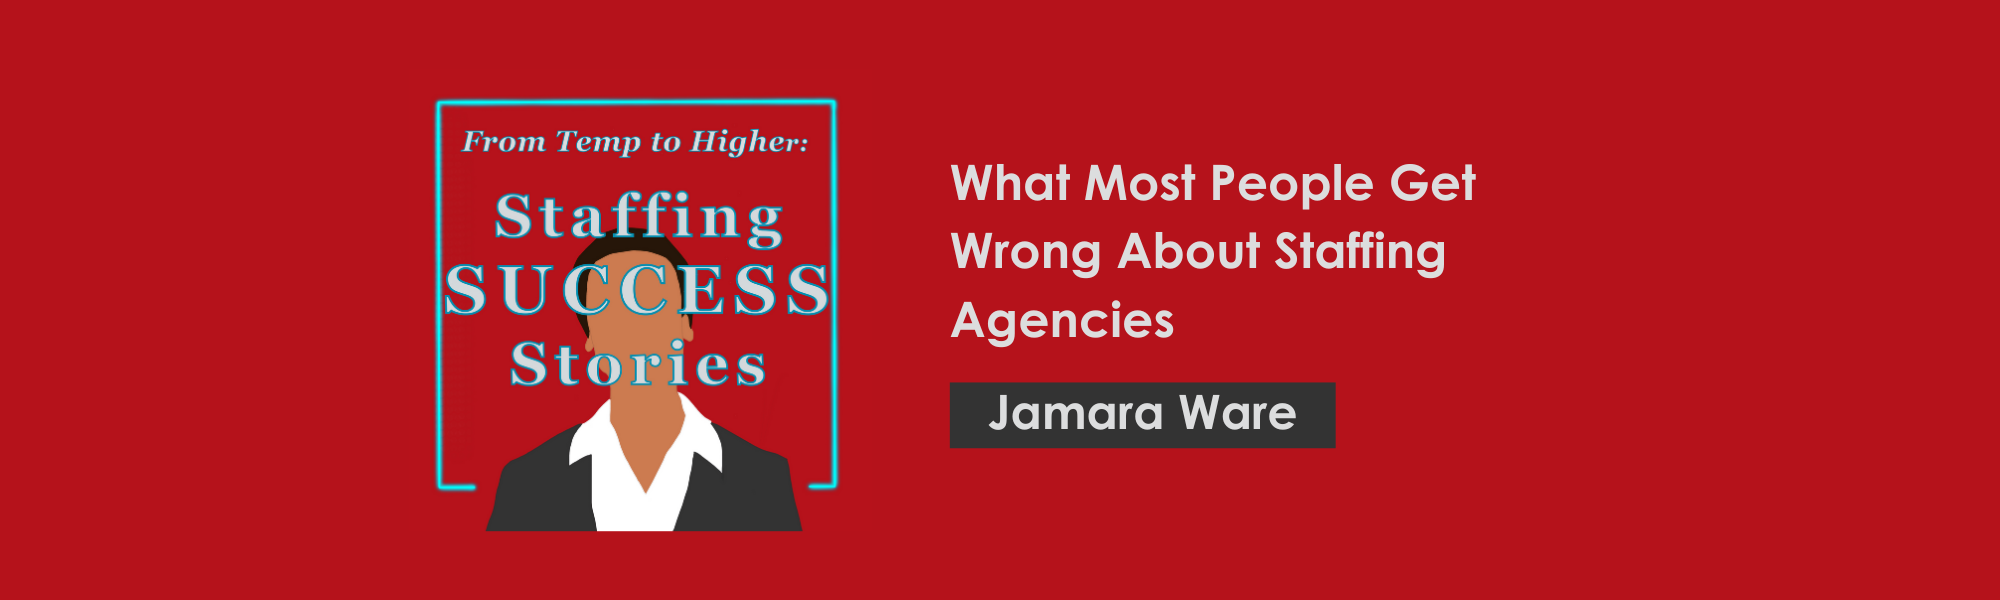 What Most People Get Wrong About Staffing Agencies Hero Image